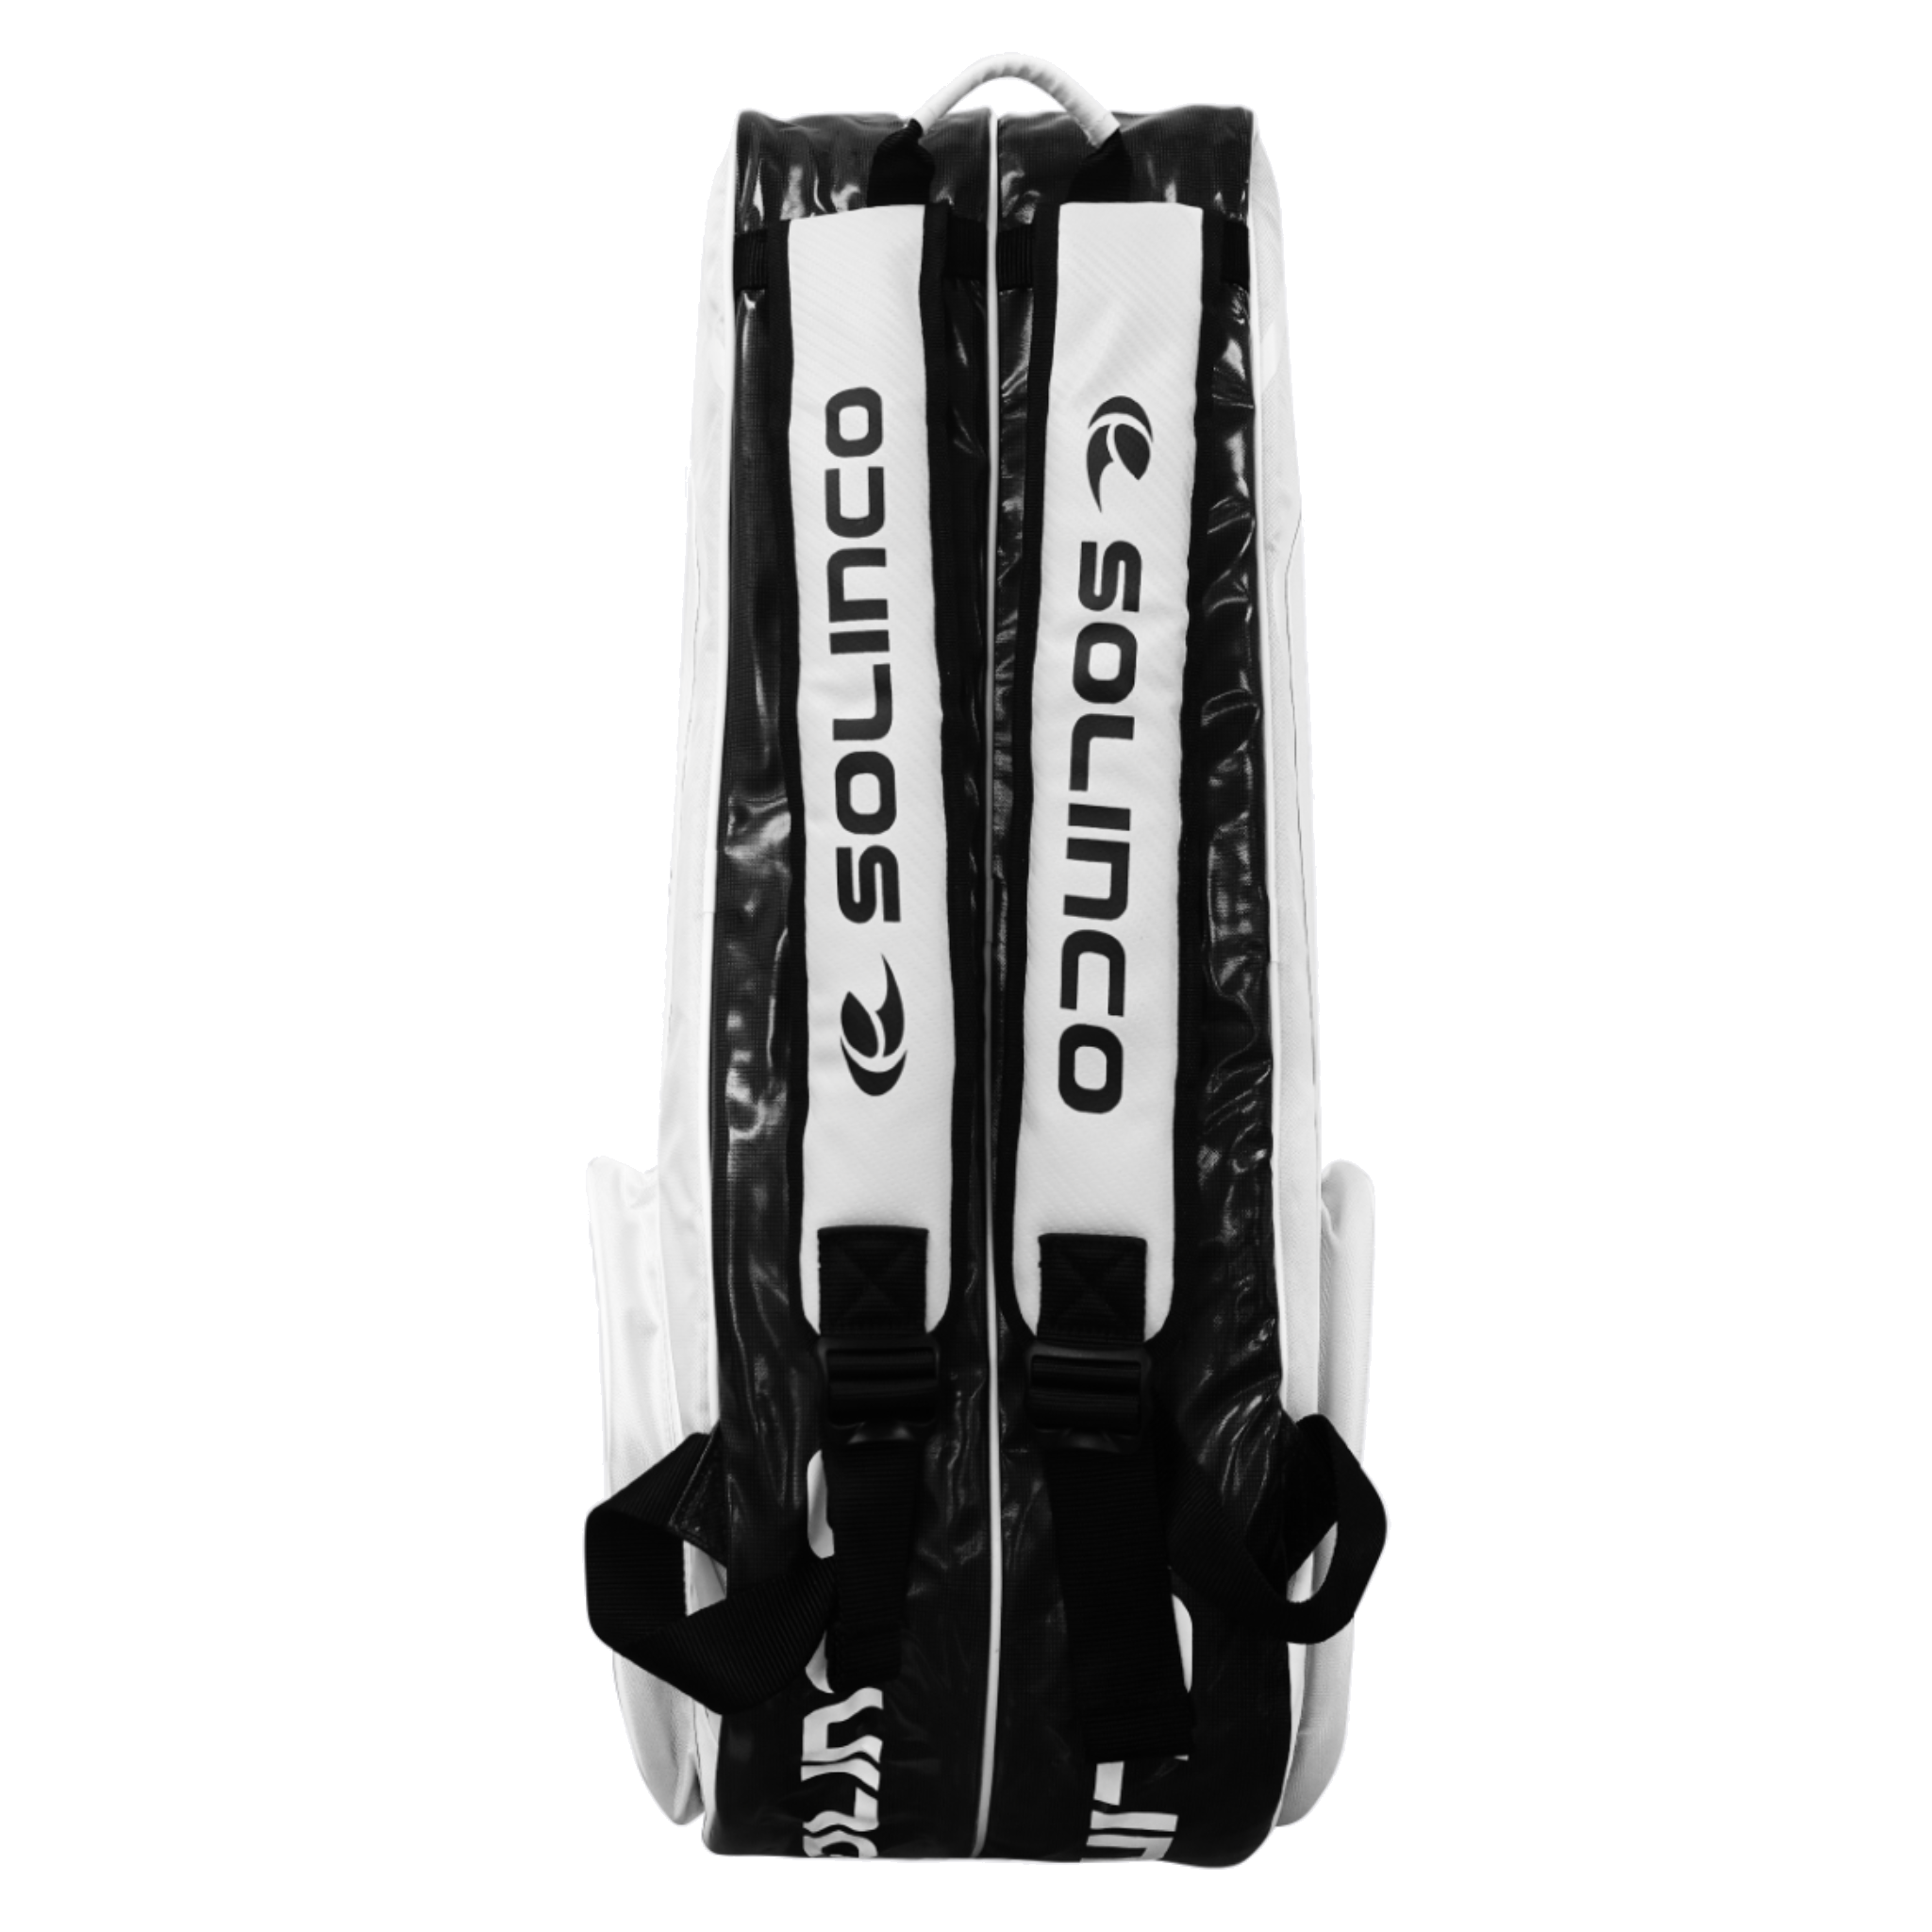 Solinco 6-Pack Tour Bag > Whiteout